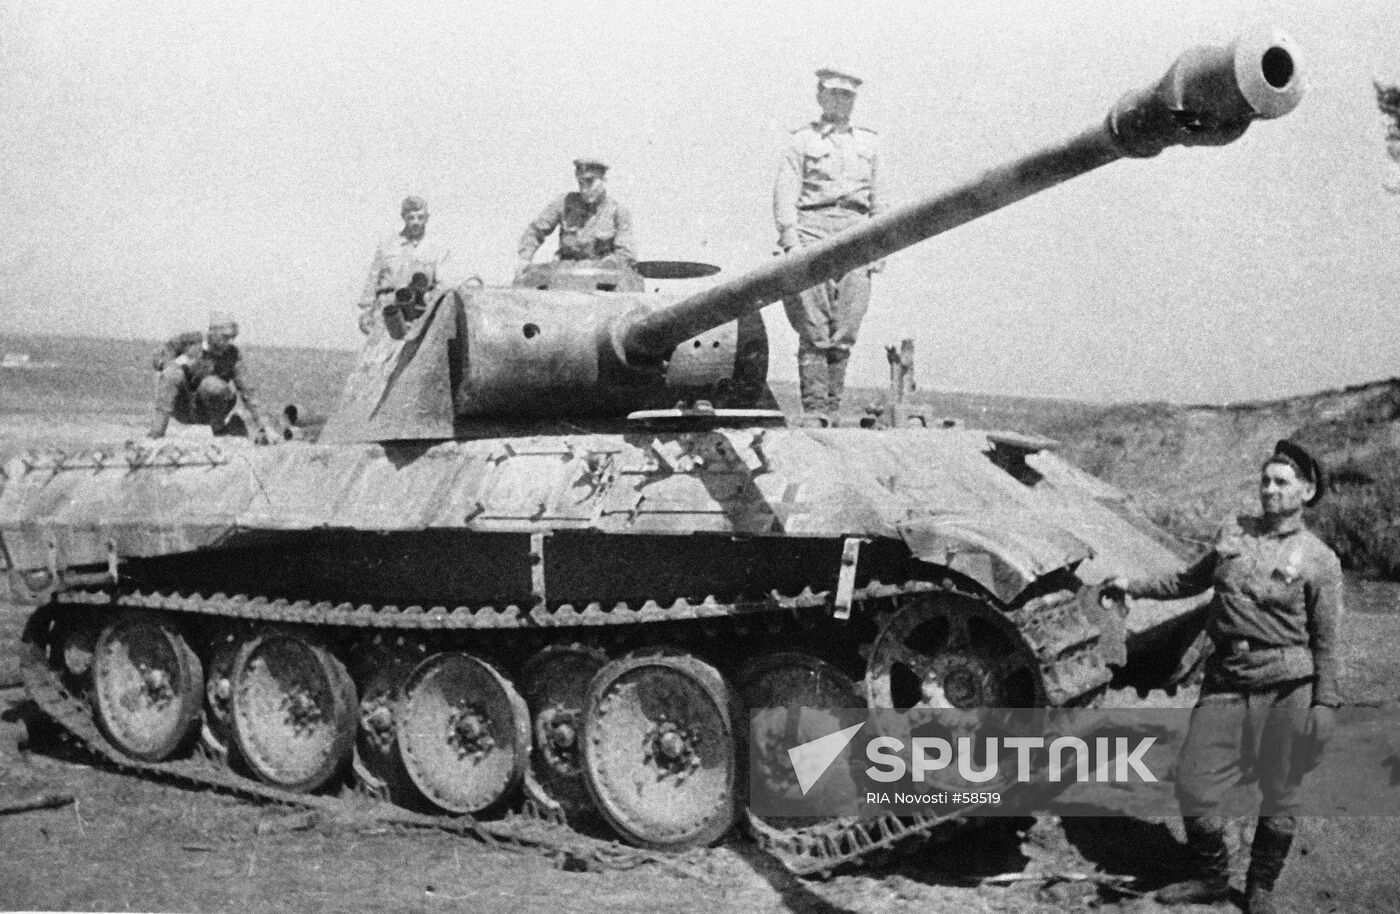 SECOND WORLD WAR KNOCKED OUT GERMAN TANK 